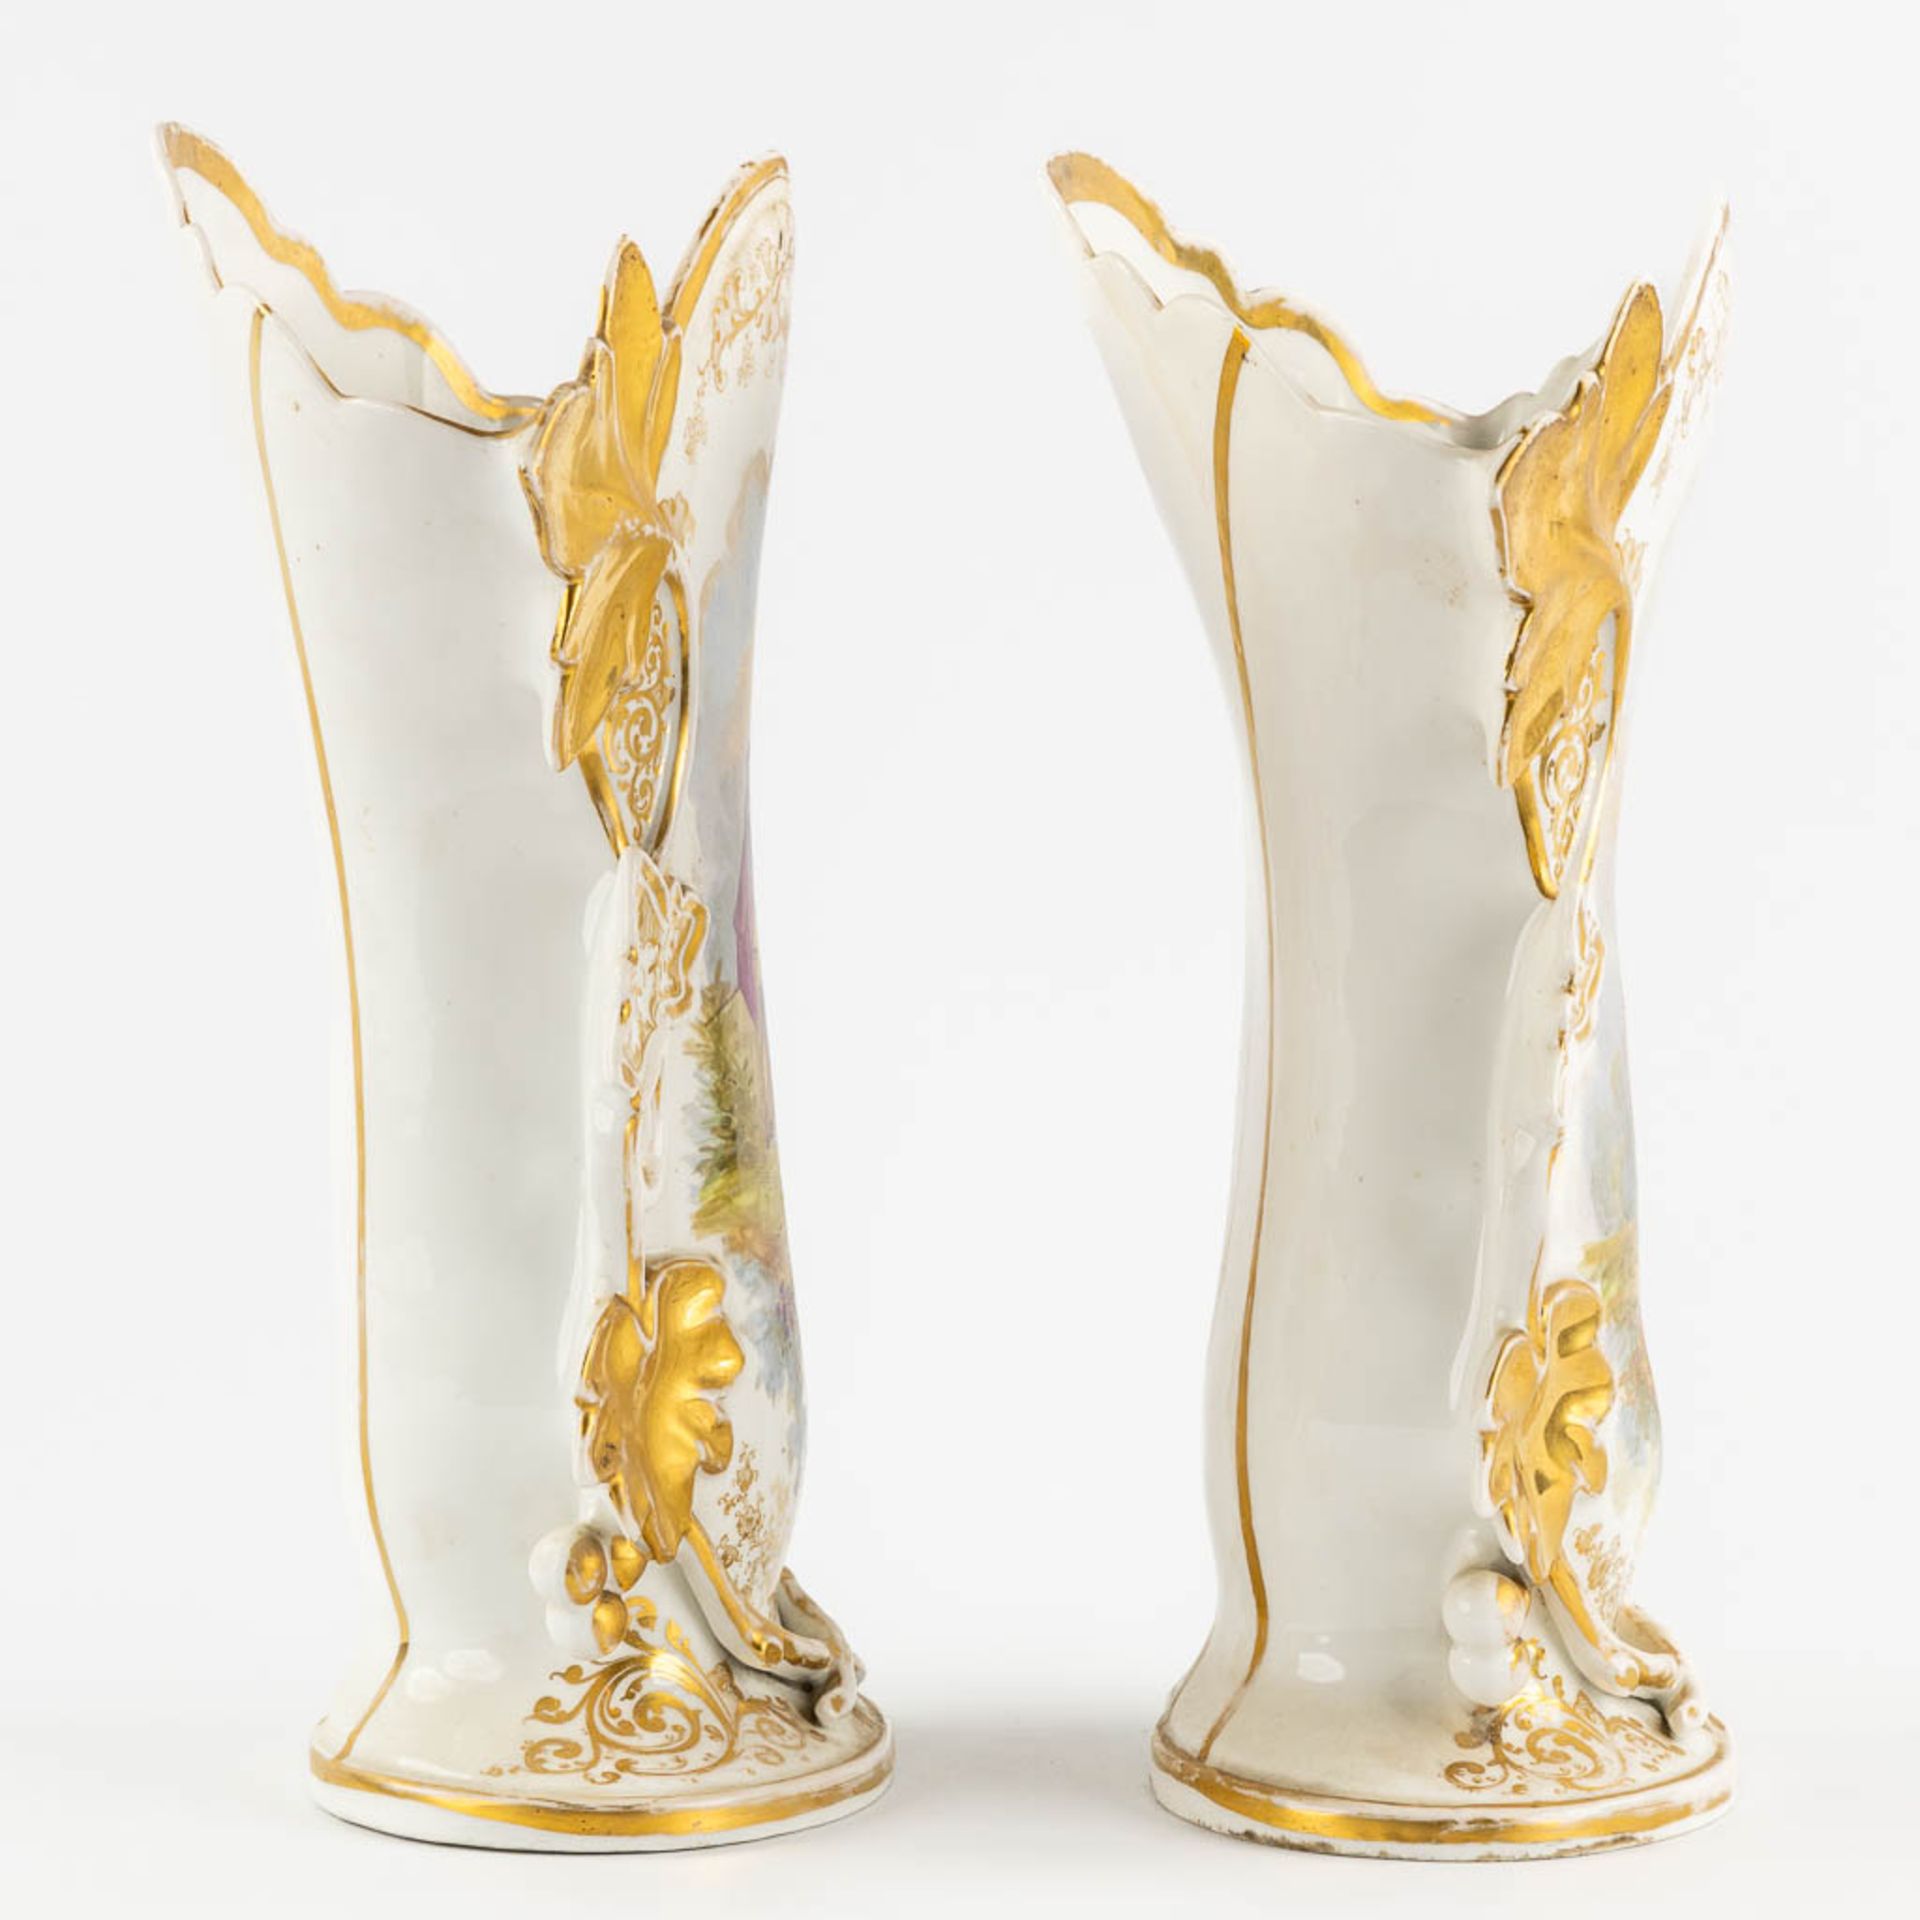 Two pair of Vieux Bruxelles vases, decorated with flowers and figurines. (L:20 x W:26 x H:39 cm) - Bild 4 aus 19